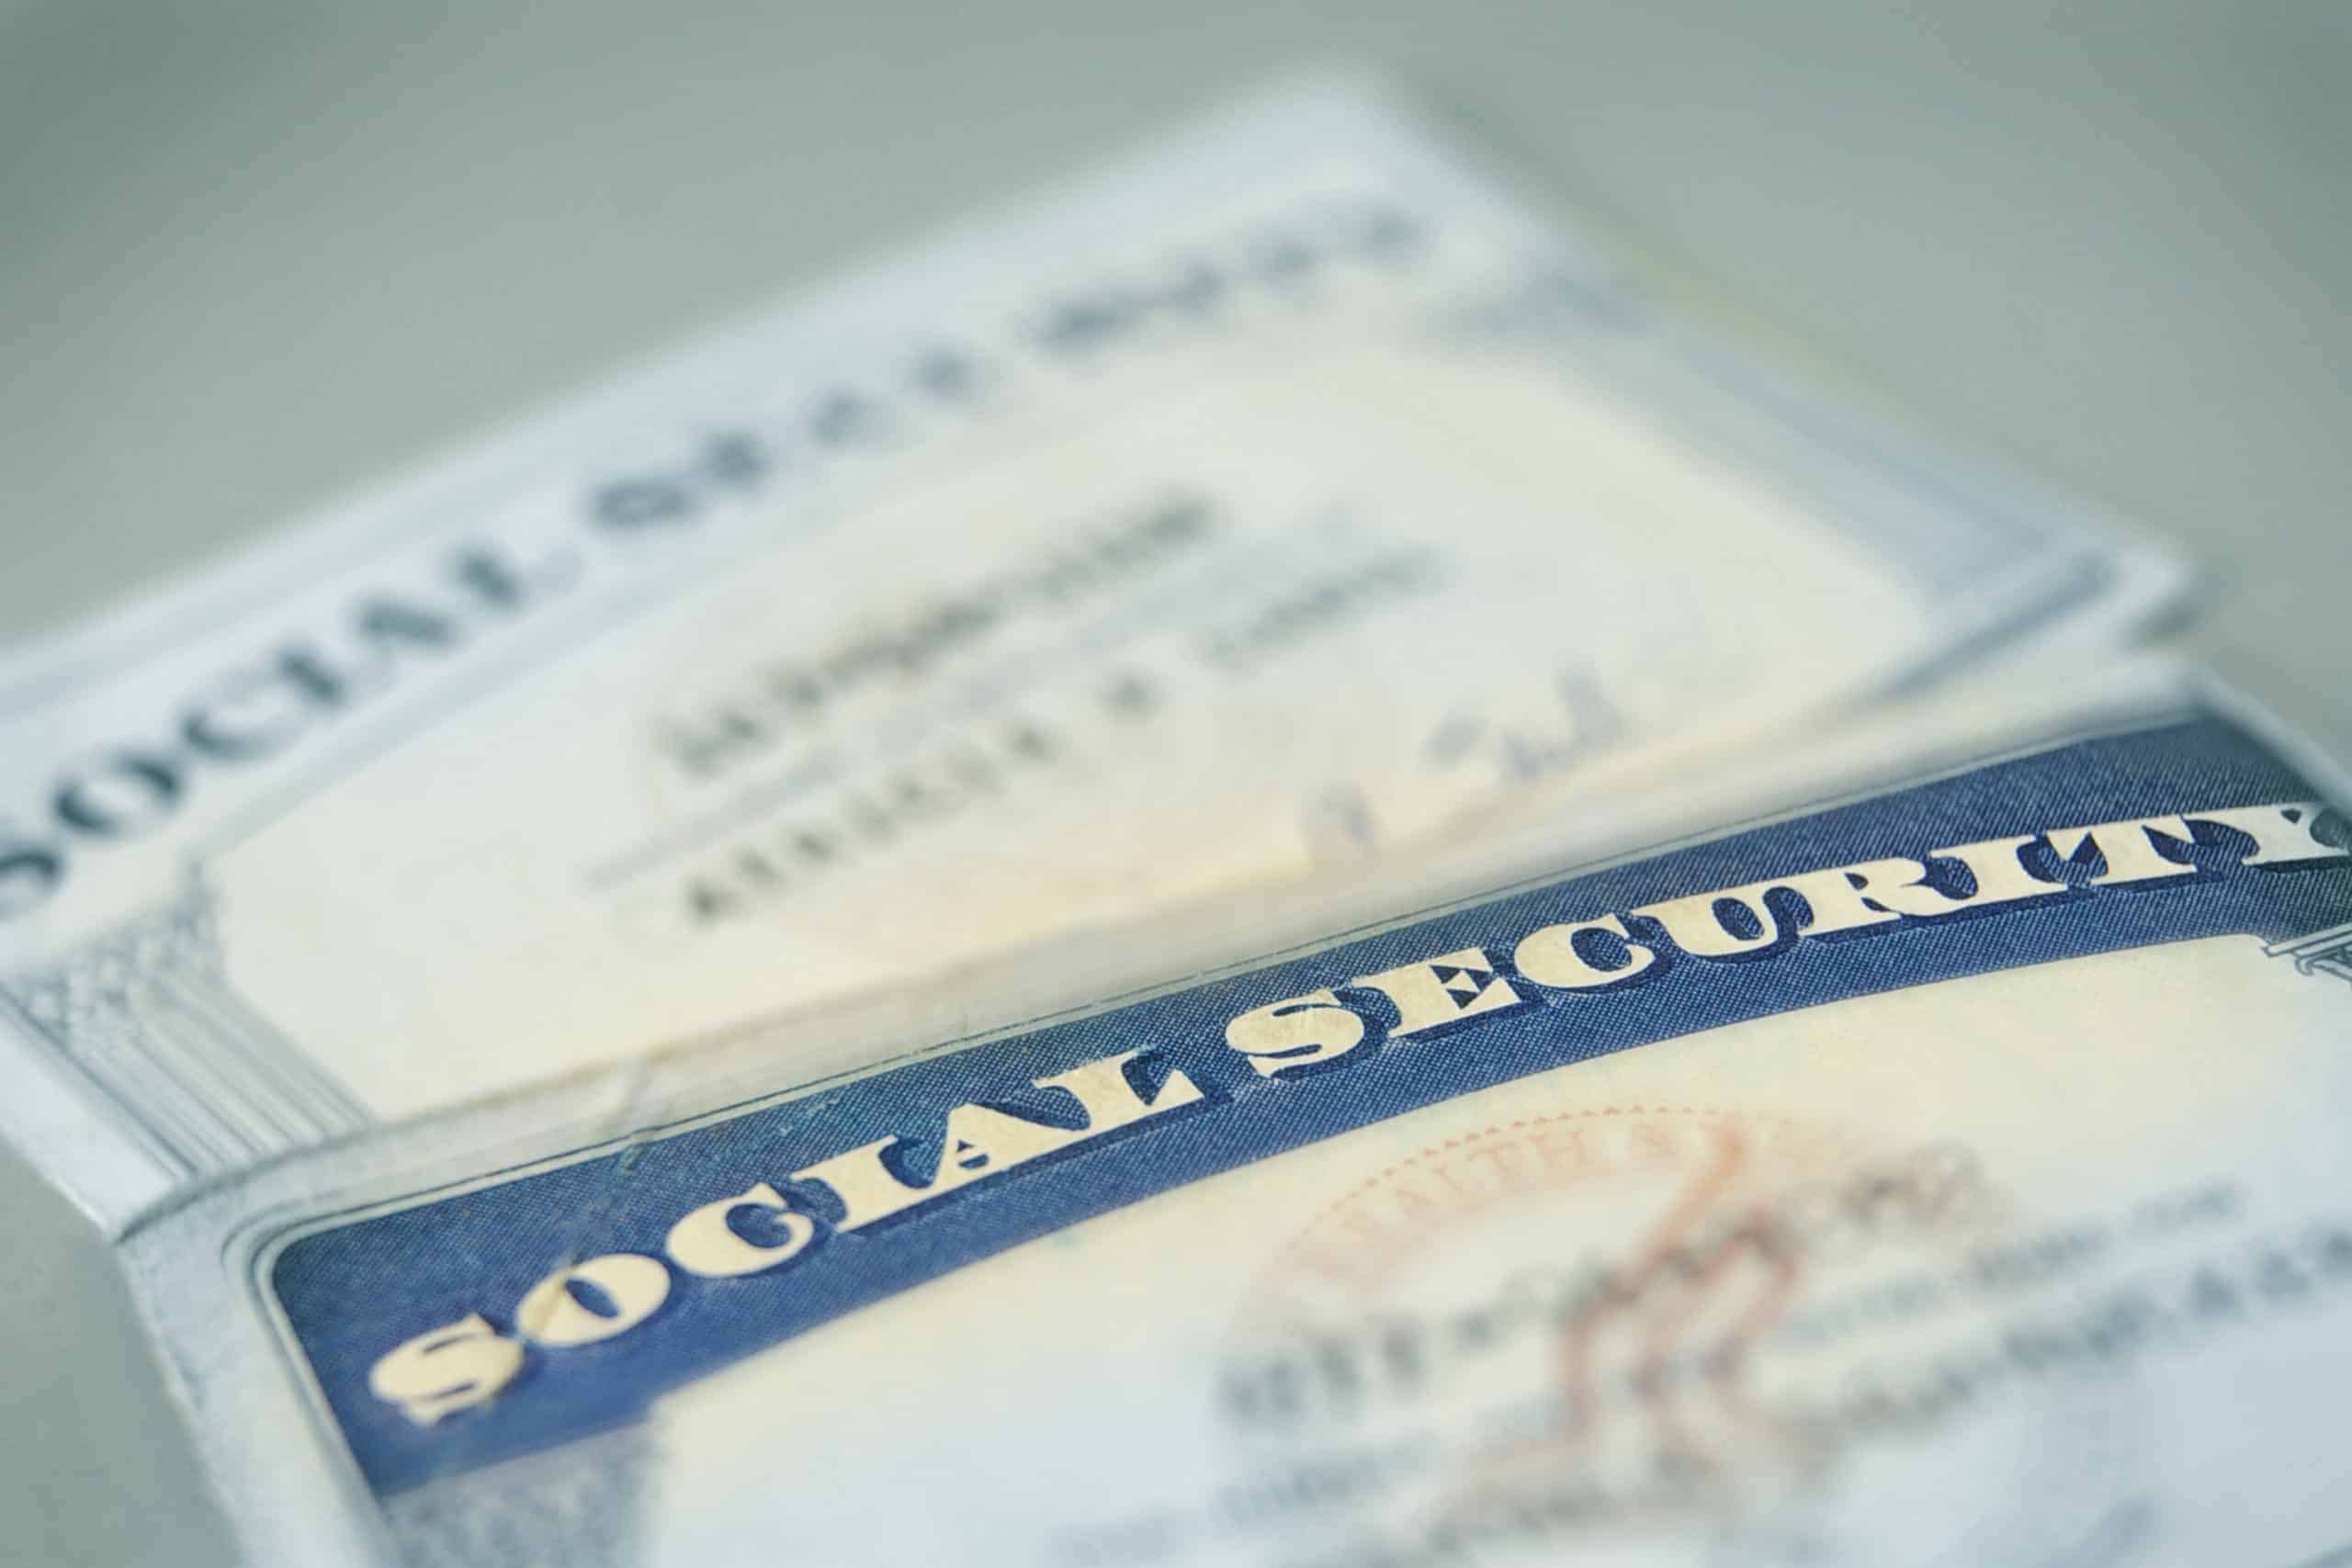 social security card name change after marriage - marriage